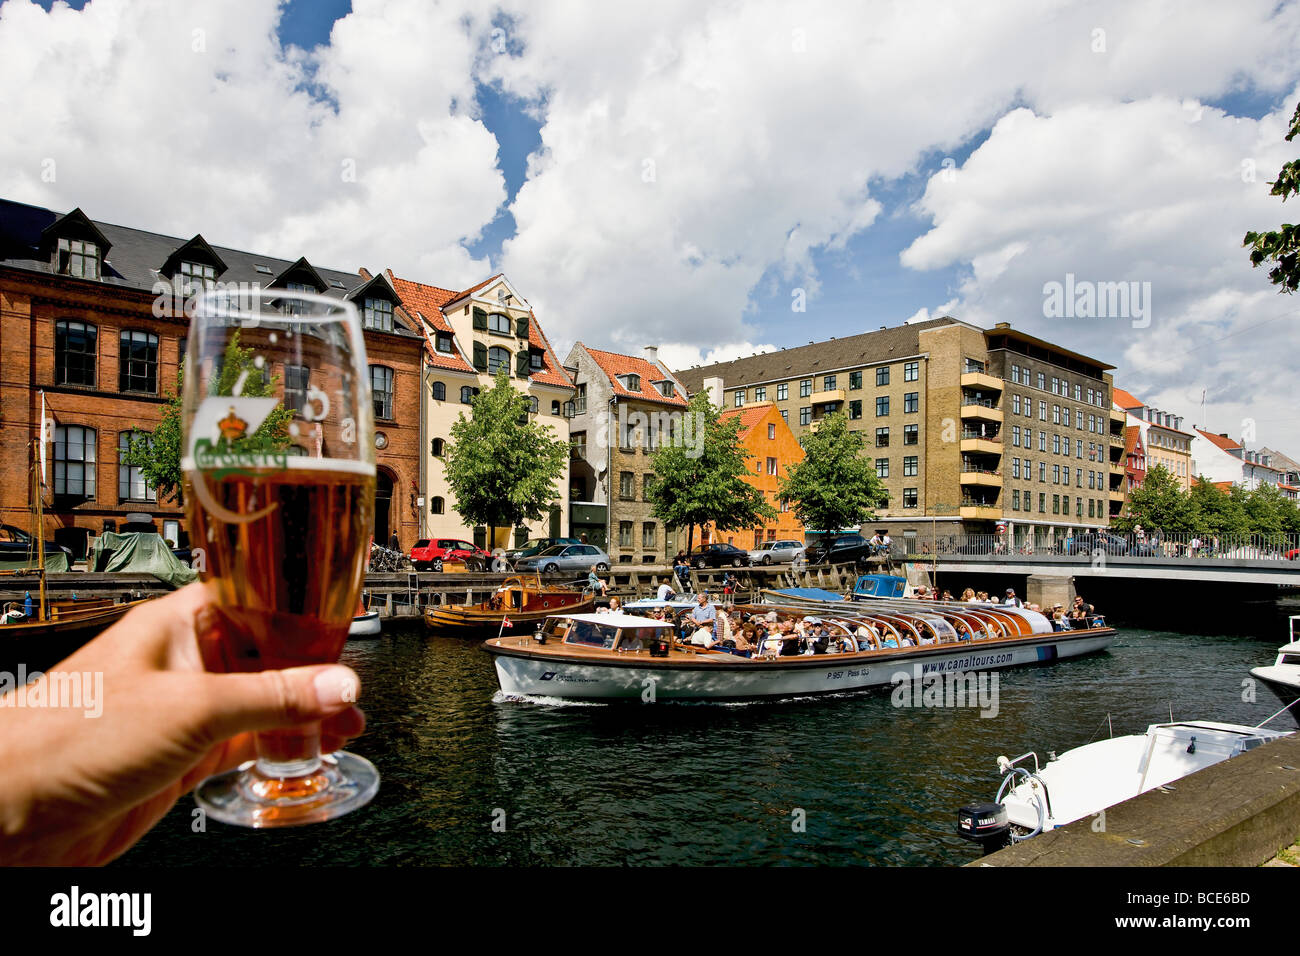 Cheers to the sightseeing boat in Christianshavn canal Stock Photo